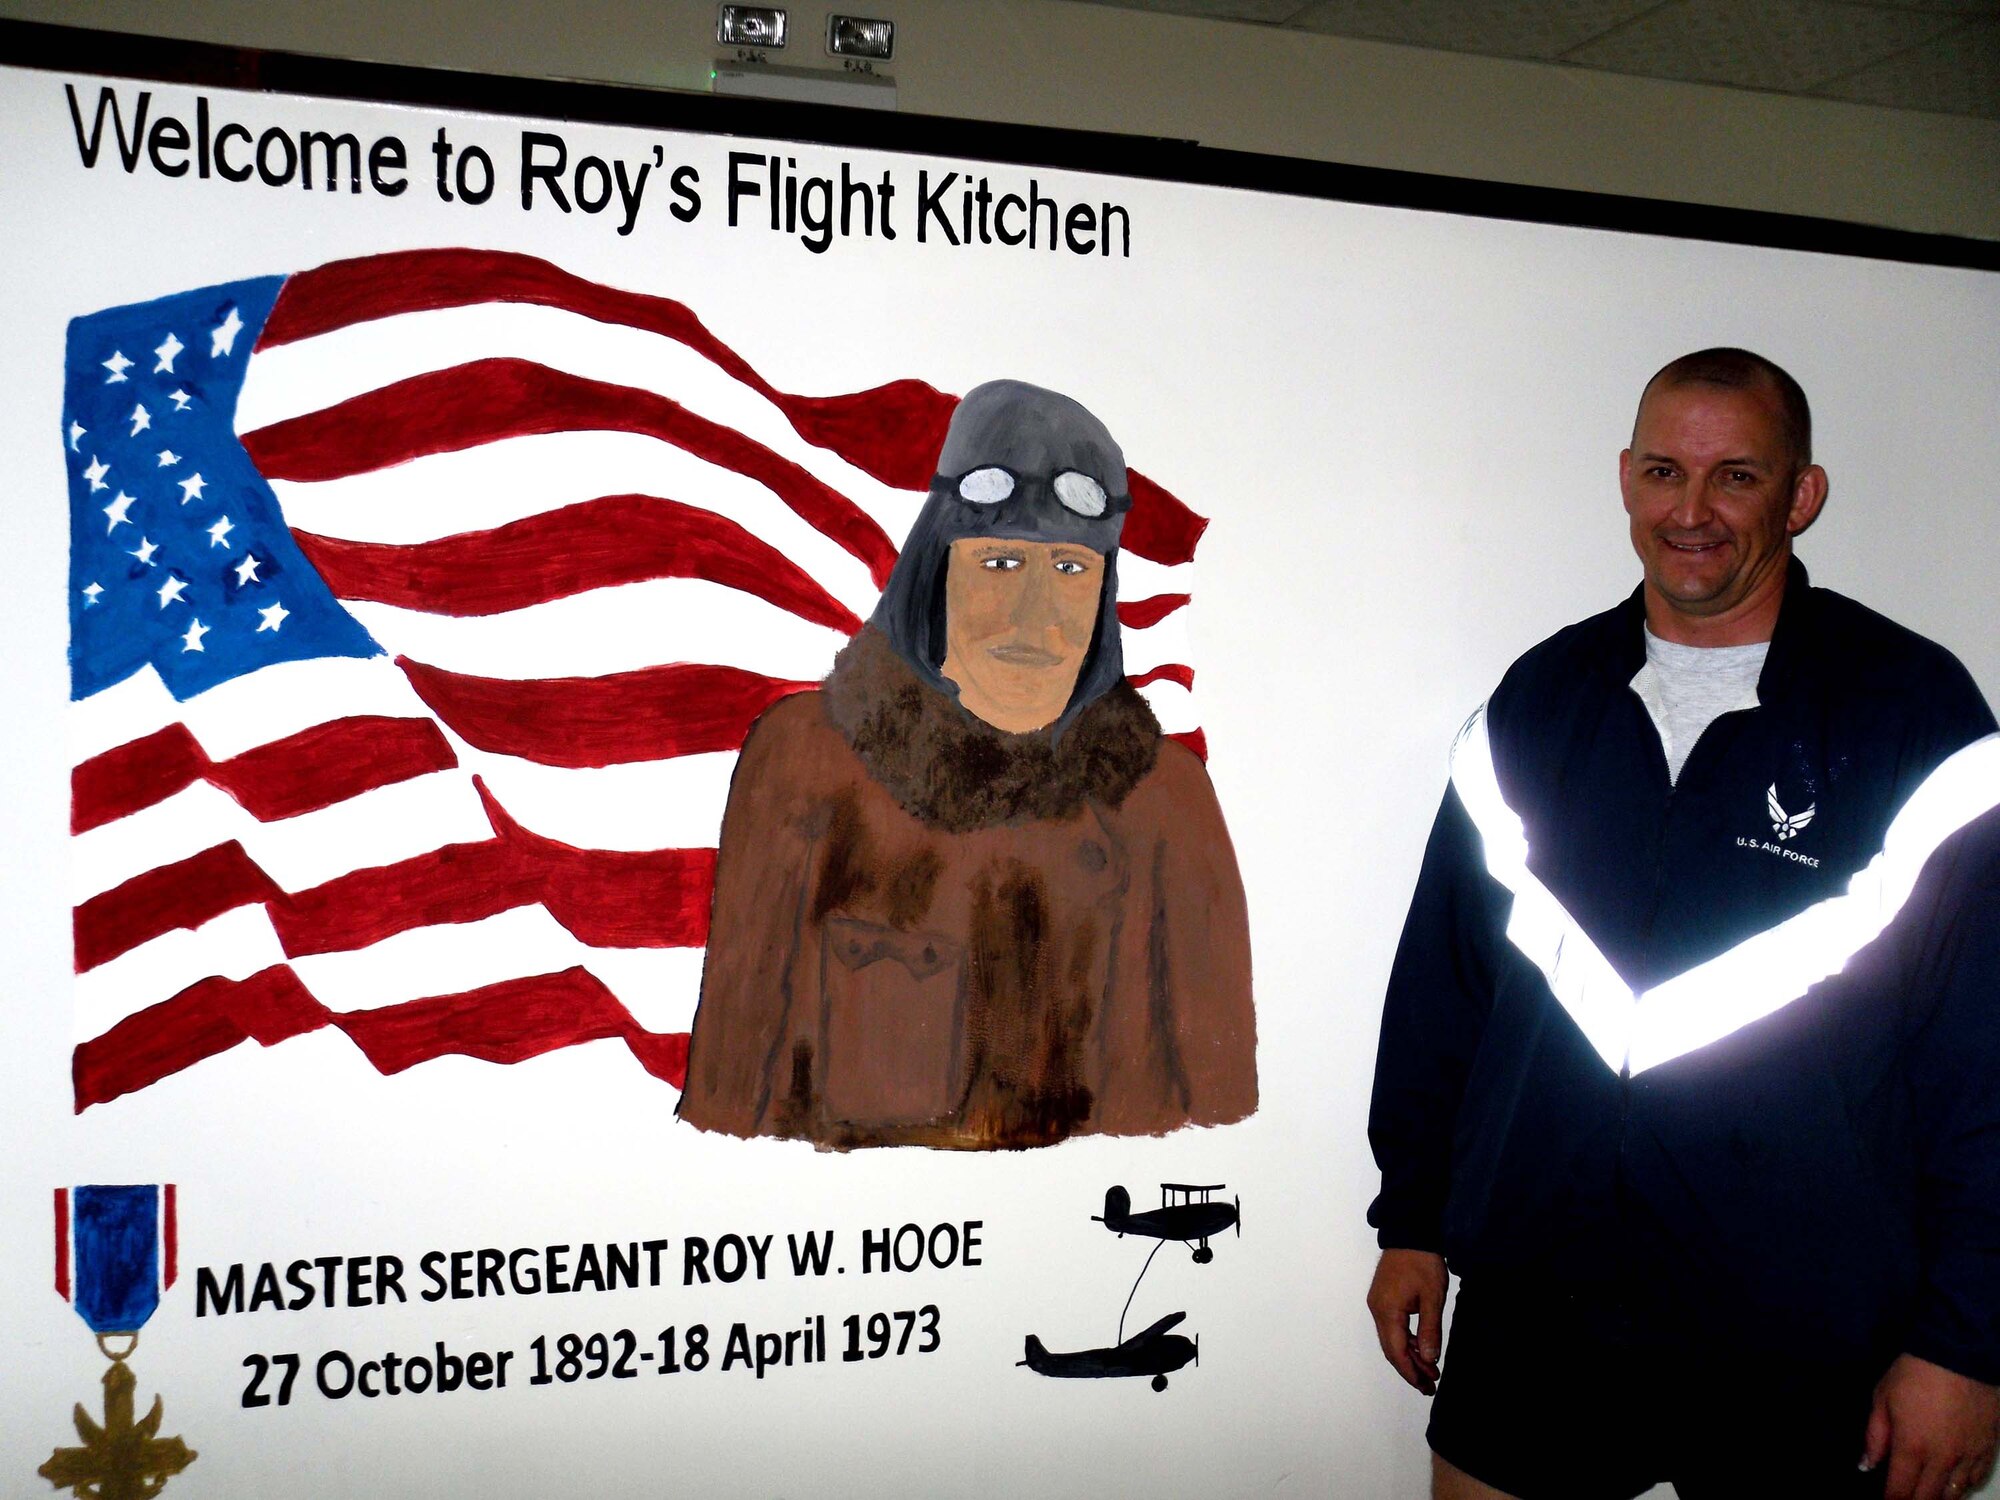 Master Sgt. Scott Sturkol, superintendent of 380th Air Expeditionary Wing Public Affairs at a non-disclosed base in Southwest Asia, stands next to a mural he helped design and paint April 18, 2010 at Roy's Flight Kitchen in the operations area for the wing honoring Master Sgt. Roy Hooe for whom the flight kitchen is named after. Sergeant Hooe is best known for his support of the first air refueling mission with the "Question Mark." Sergeant Sturkol is deployed from the Headquarters Air Mobility Command Public Affairs at Scott Air Force Base, Ill., and his hometown is Wakefield, Mich. (U.S. Air Force Photo/Master Sgt. Scott T. Sturkol/Released)